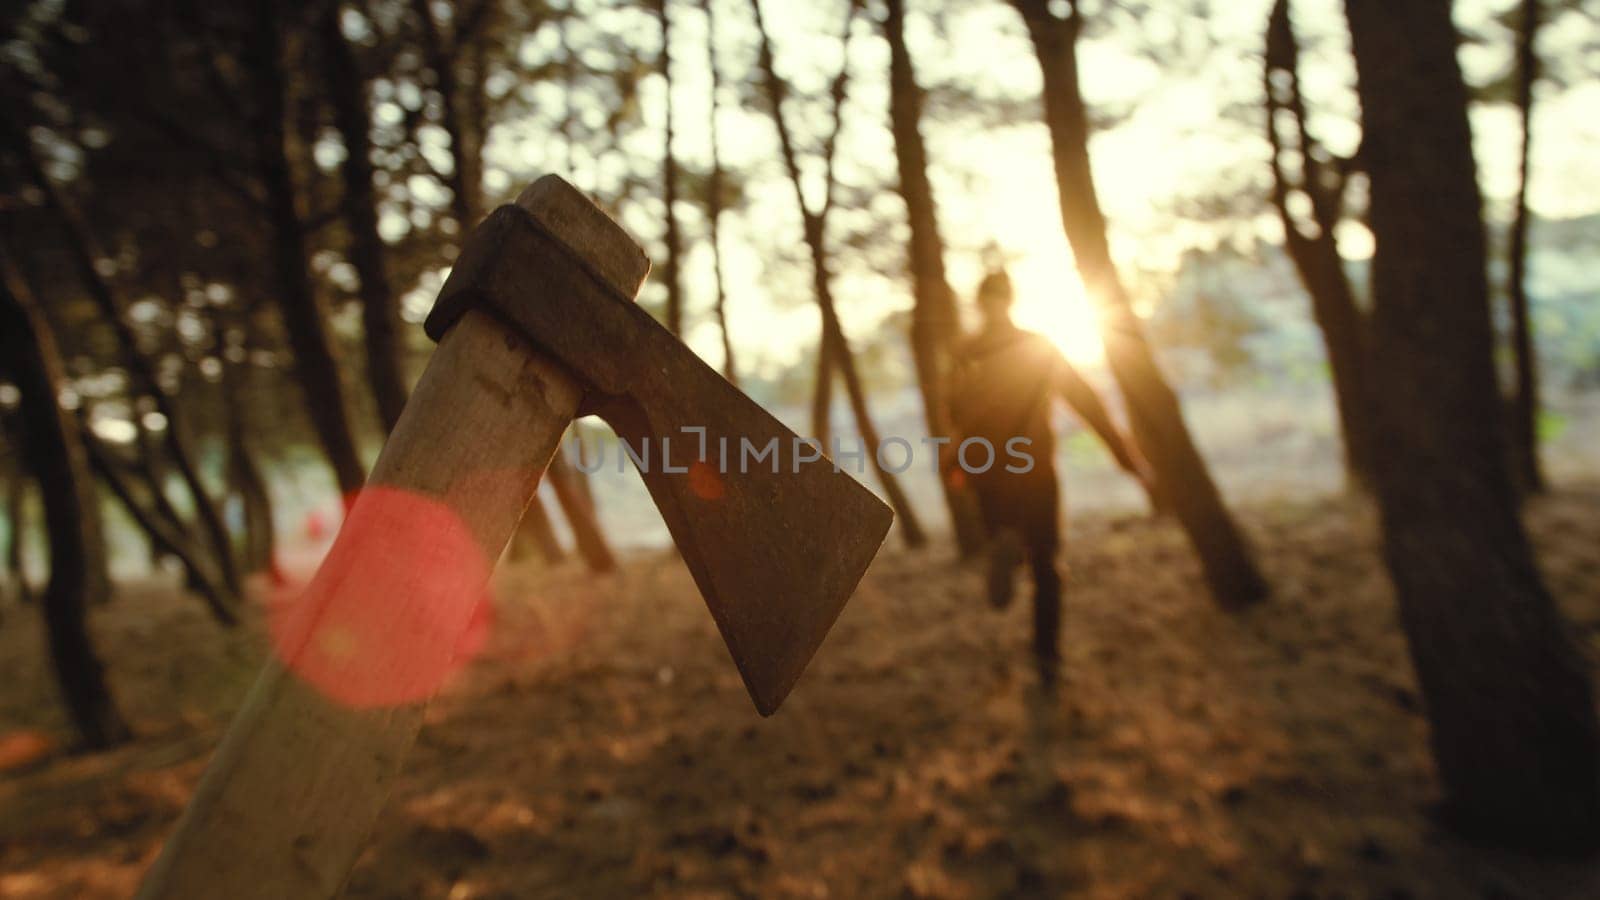 Chasing a victim with an axe in the woods, point of view shot by Polonio_Video